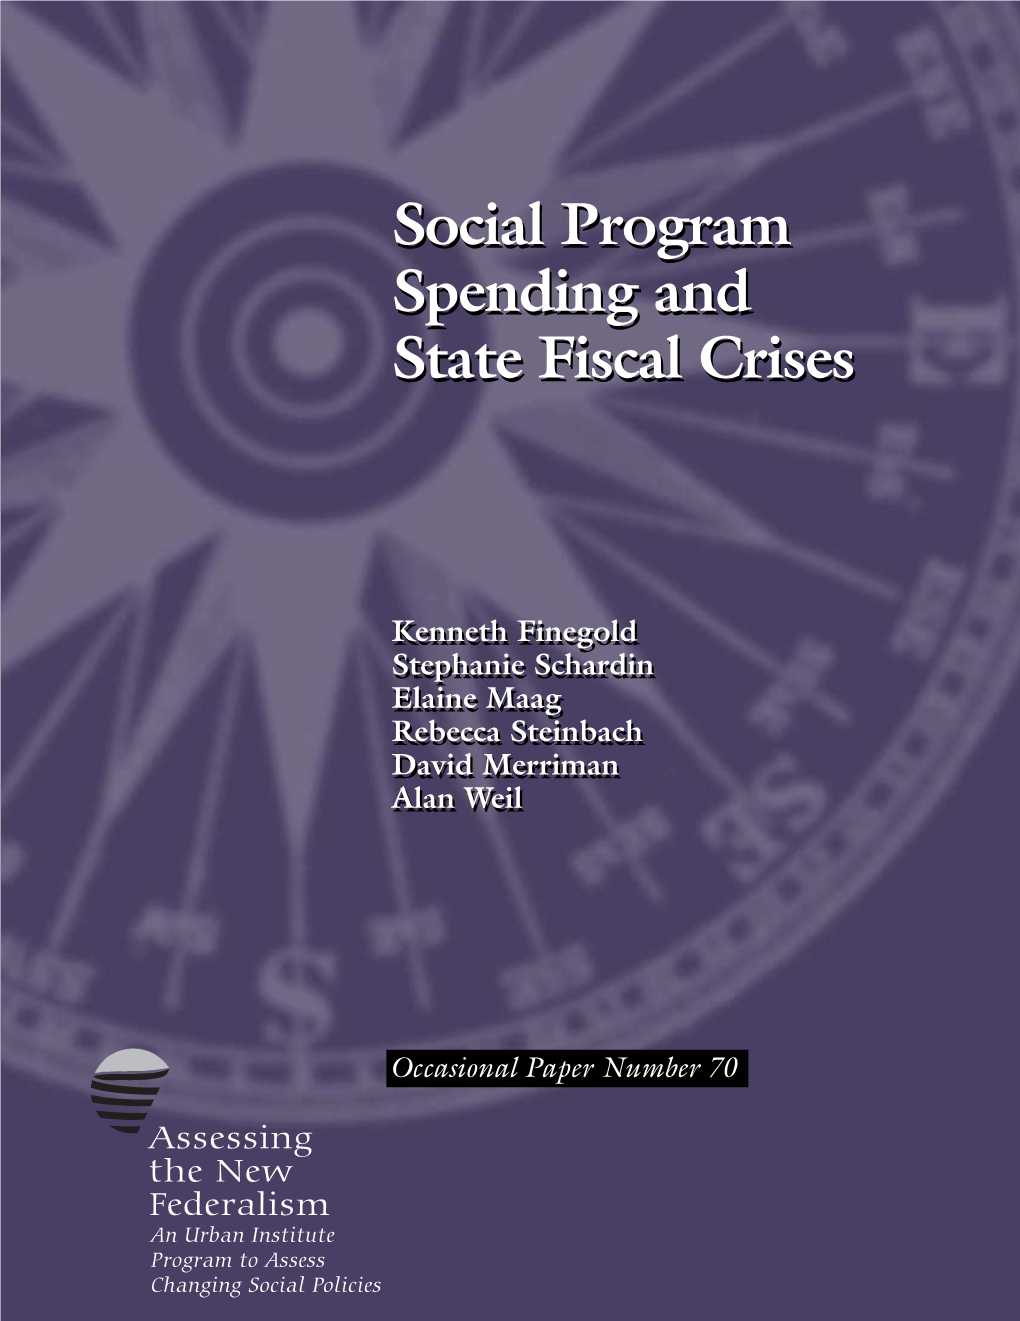 Social Program Spending and State Fiscal Crises